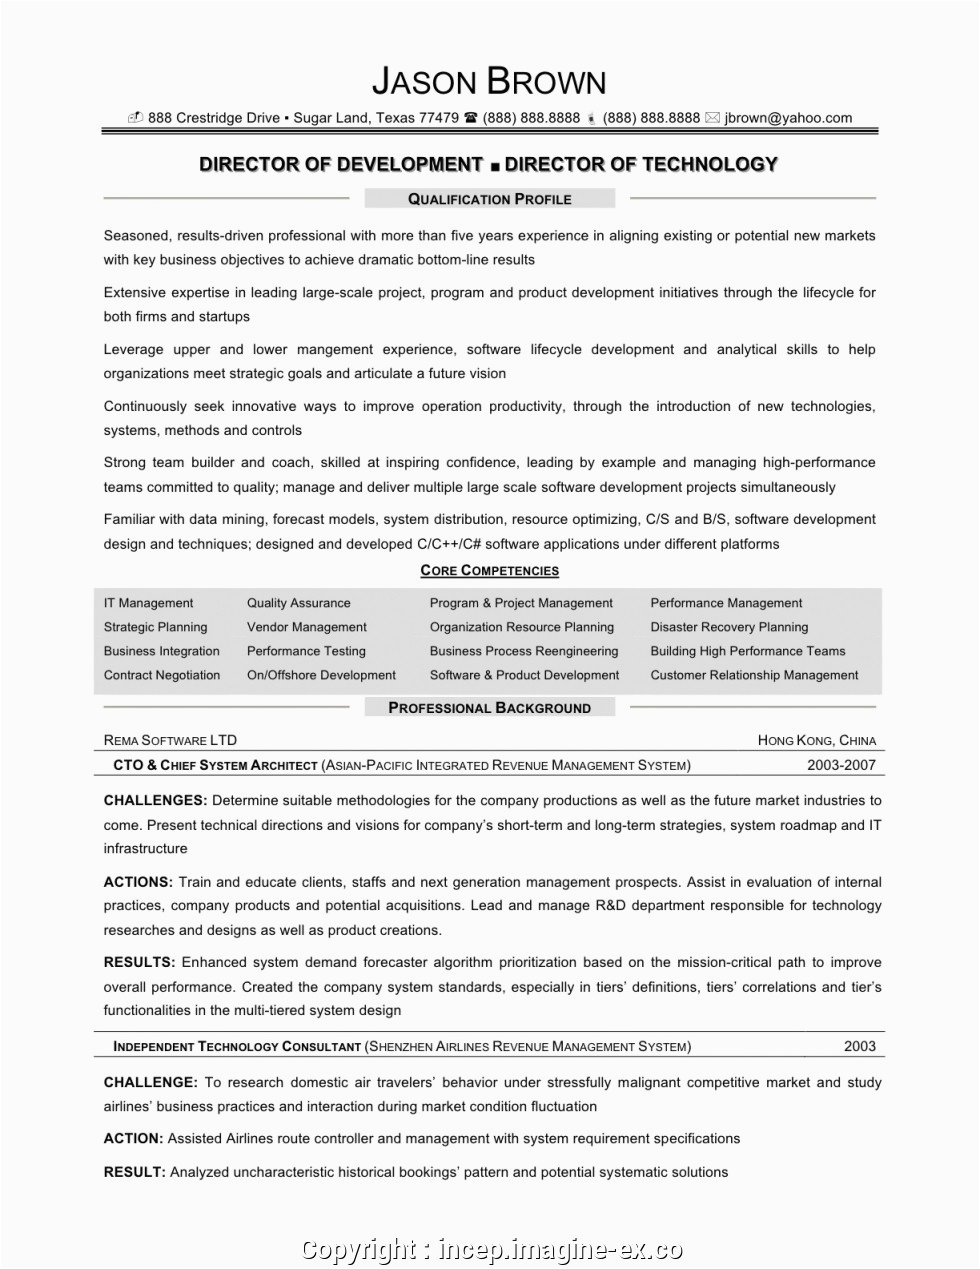 able information technology director resume